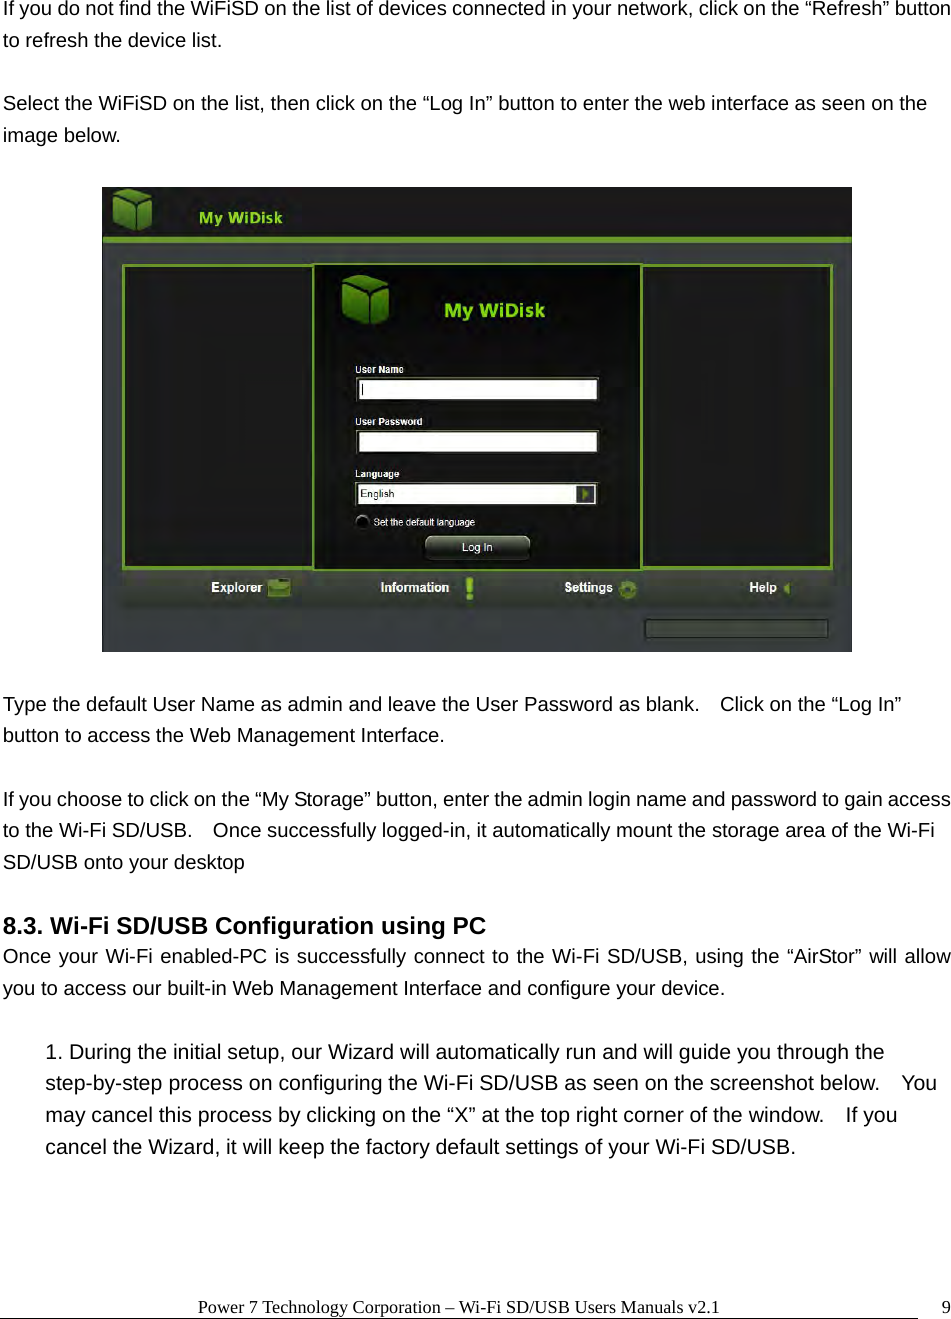 Power 7 Technology Corporation – Wi-Fi SD/USB Users Manuals v2.1  9 If you do not find the WiFiSD on the list of devices connected in your network, click on the “Refresh” button to refresh the device list.  Select the WiFiSD on the list, then click on the “Log In” button to enter the web interface as seen on the image below.      Type the default User Name as admin and leave the User Password as blank.    Click on the “Log In” button to access the Web Management Interface.  If you choose to click on the “My Storage” button, enter the admin login name and password to gain access to the Wi-Fi SD/USB.    Once successfully logged-in, it automatically mount the storage area of the Wi-Fi SD/USB onto your desktop  8.3. Wi-Fi SD/USB Configuration using PC Once your Wi-Fi enabled-PC is successfully connect to the Wi-Fi SD/USB, using the “AirStor” will allow you to access our built-in Web Management Interface and configure your device.    1. During the initial setup, our Wizard will automatically run and will guide you through the step-by-step process on configuring the Wi-Fi SD/USB as seen on the screenshot below.    You may cancel this process by clicking on the “X” at the top right corner of the window.    If you cancel the Wizard, it will keep the factory default settings of your Wi-Fi SD/USB.    